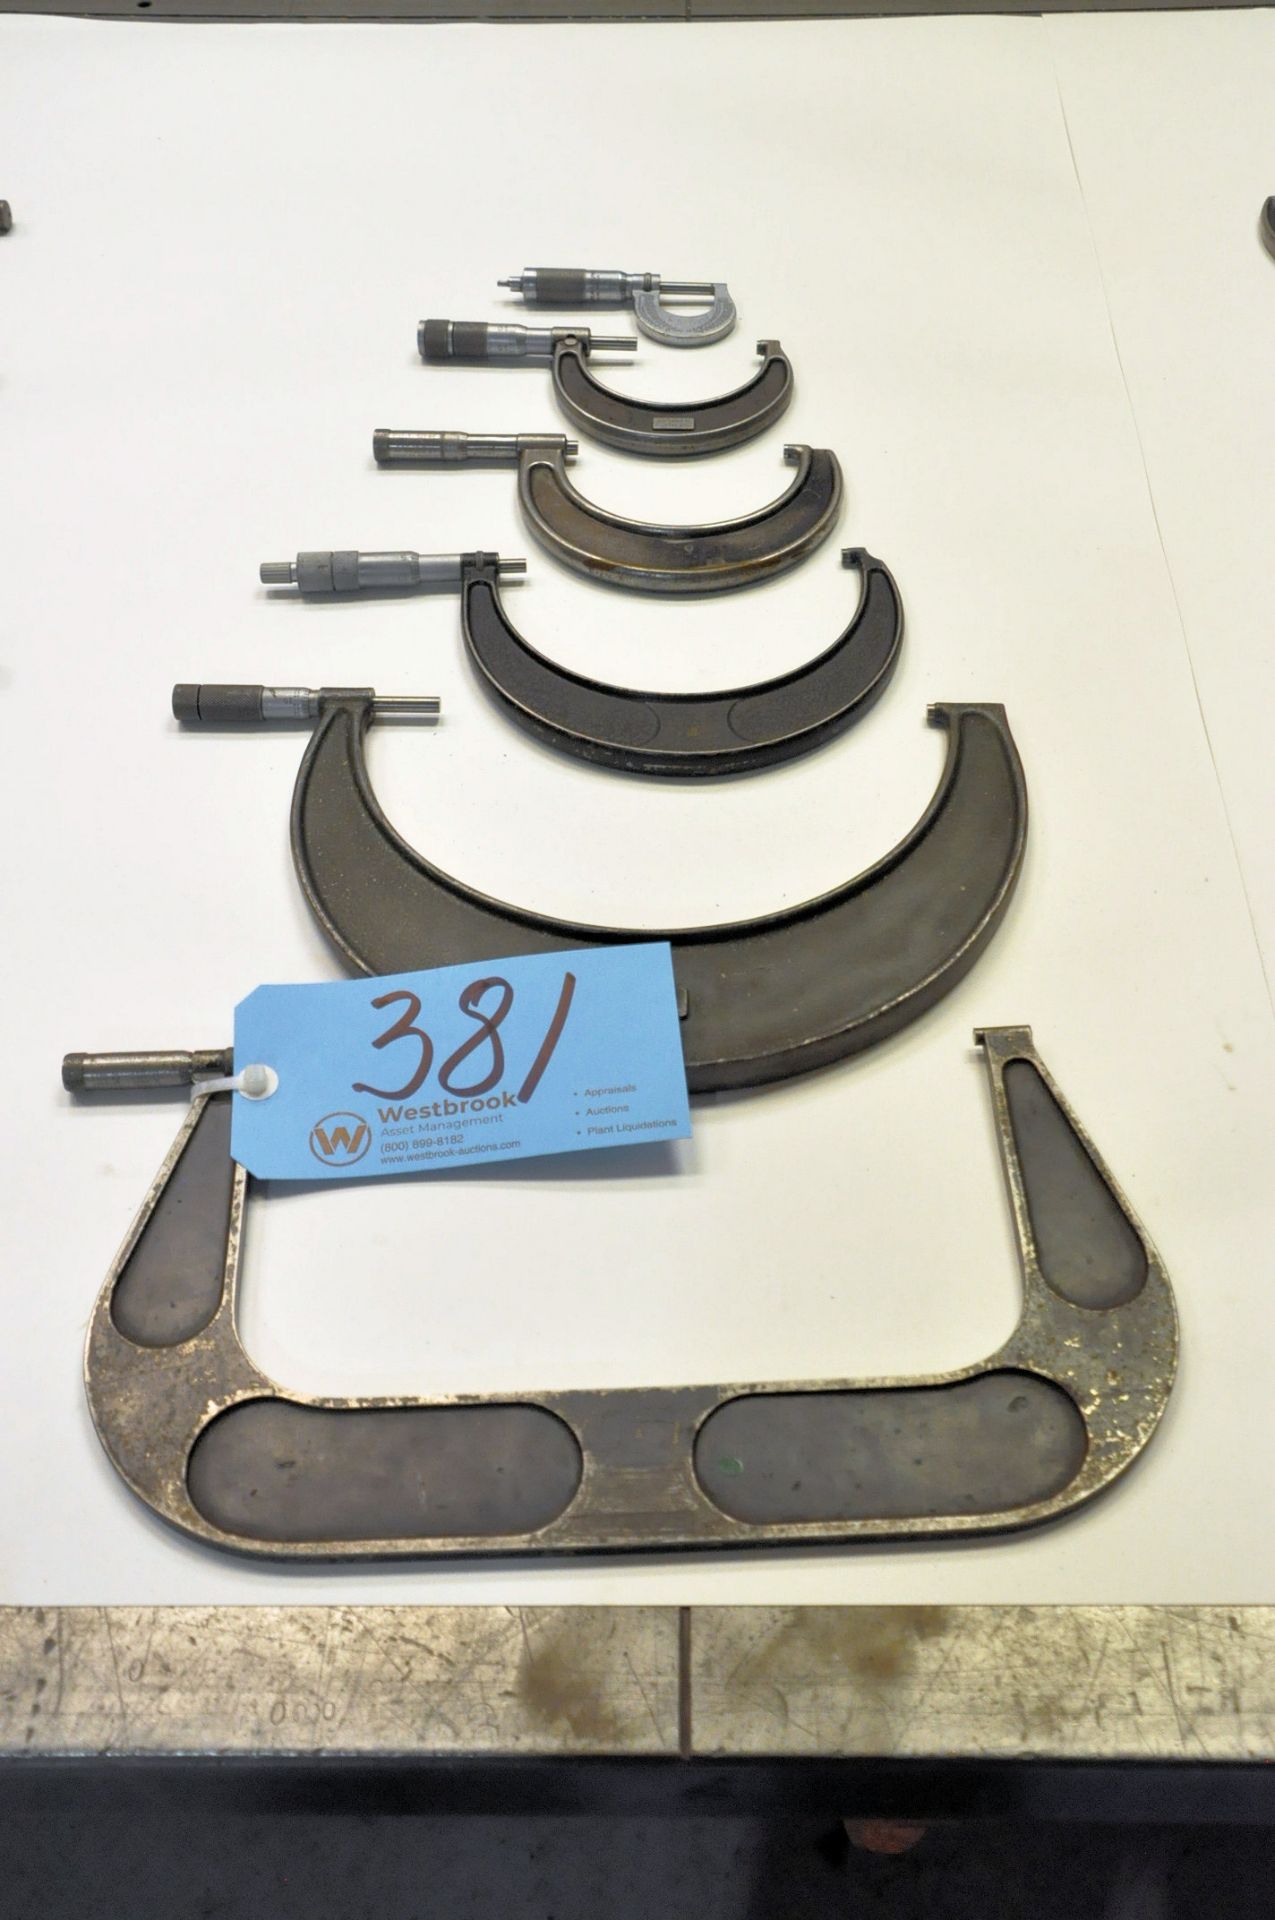 Lot-Six Piece Outside Micrometers in (1) Row